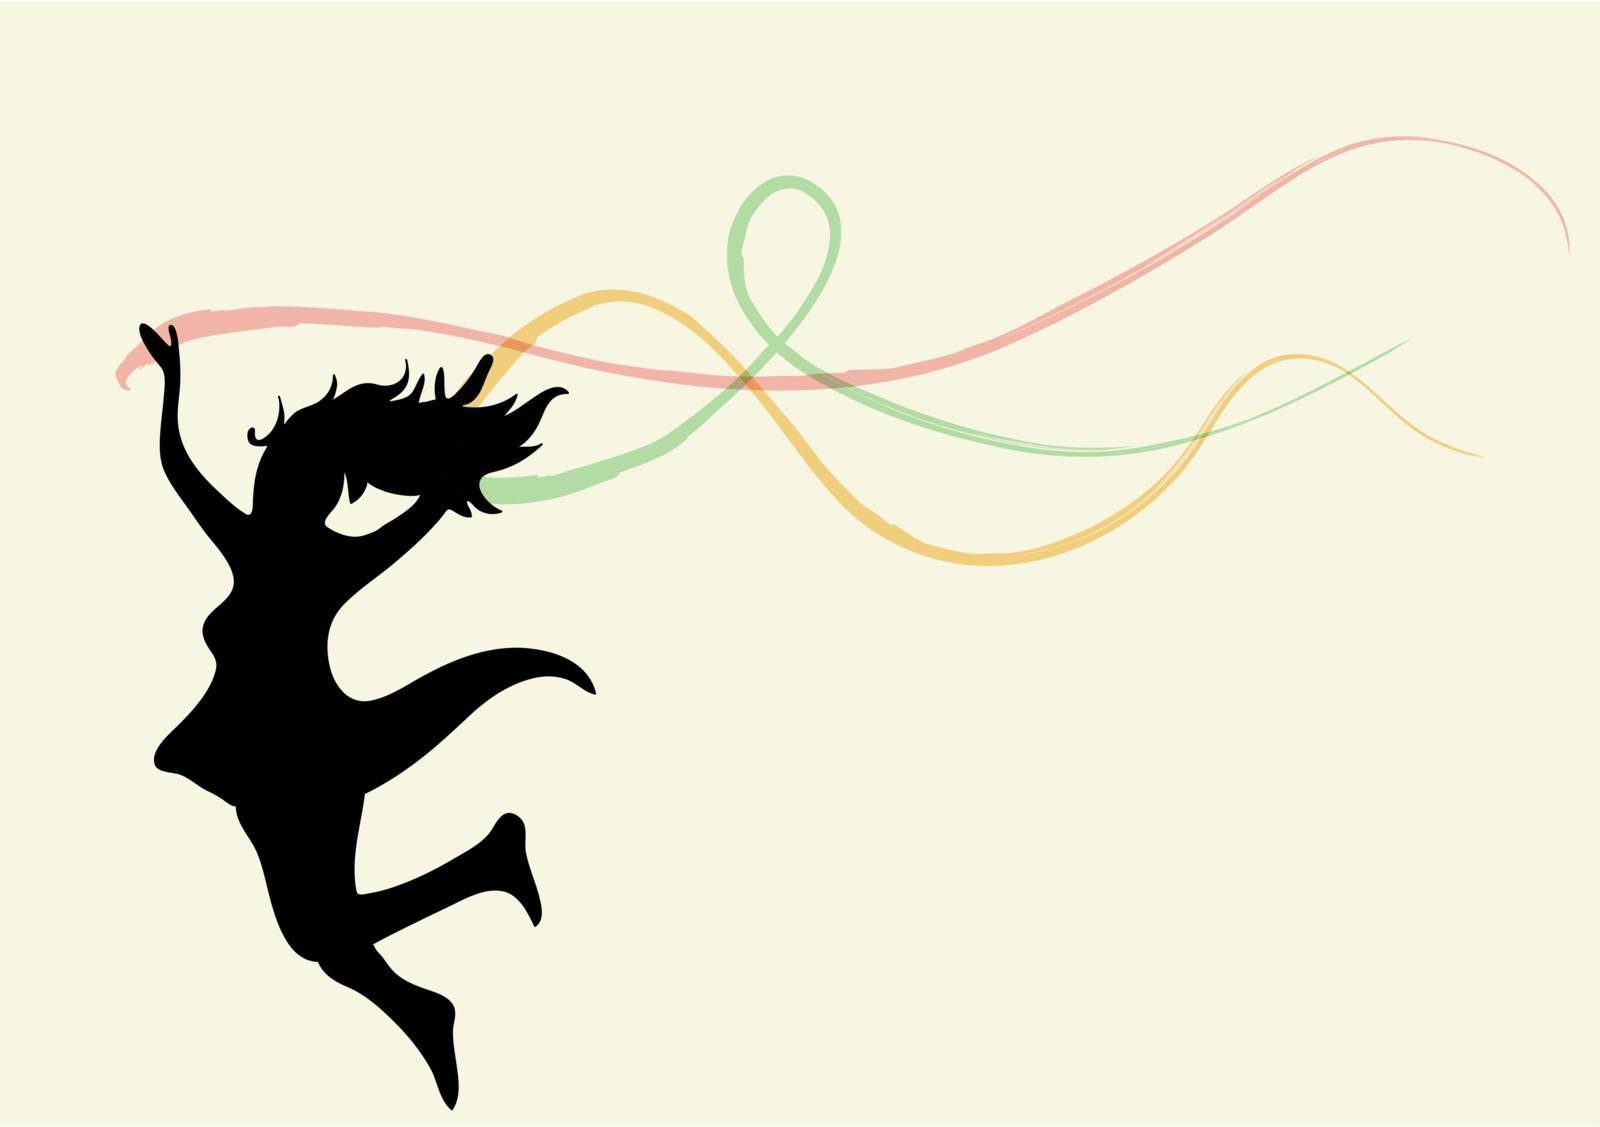 Free jumping woman with ribbons. EPS10 file version. This illustration contains transparencies and is layered for easy manipulation and custom coloring